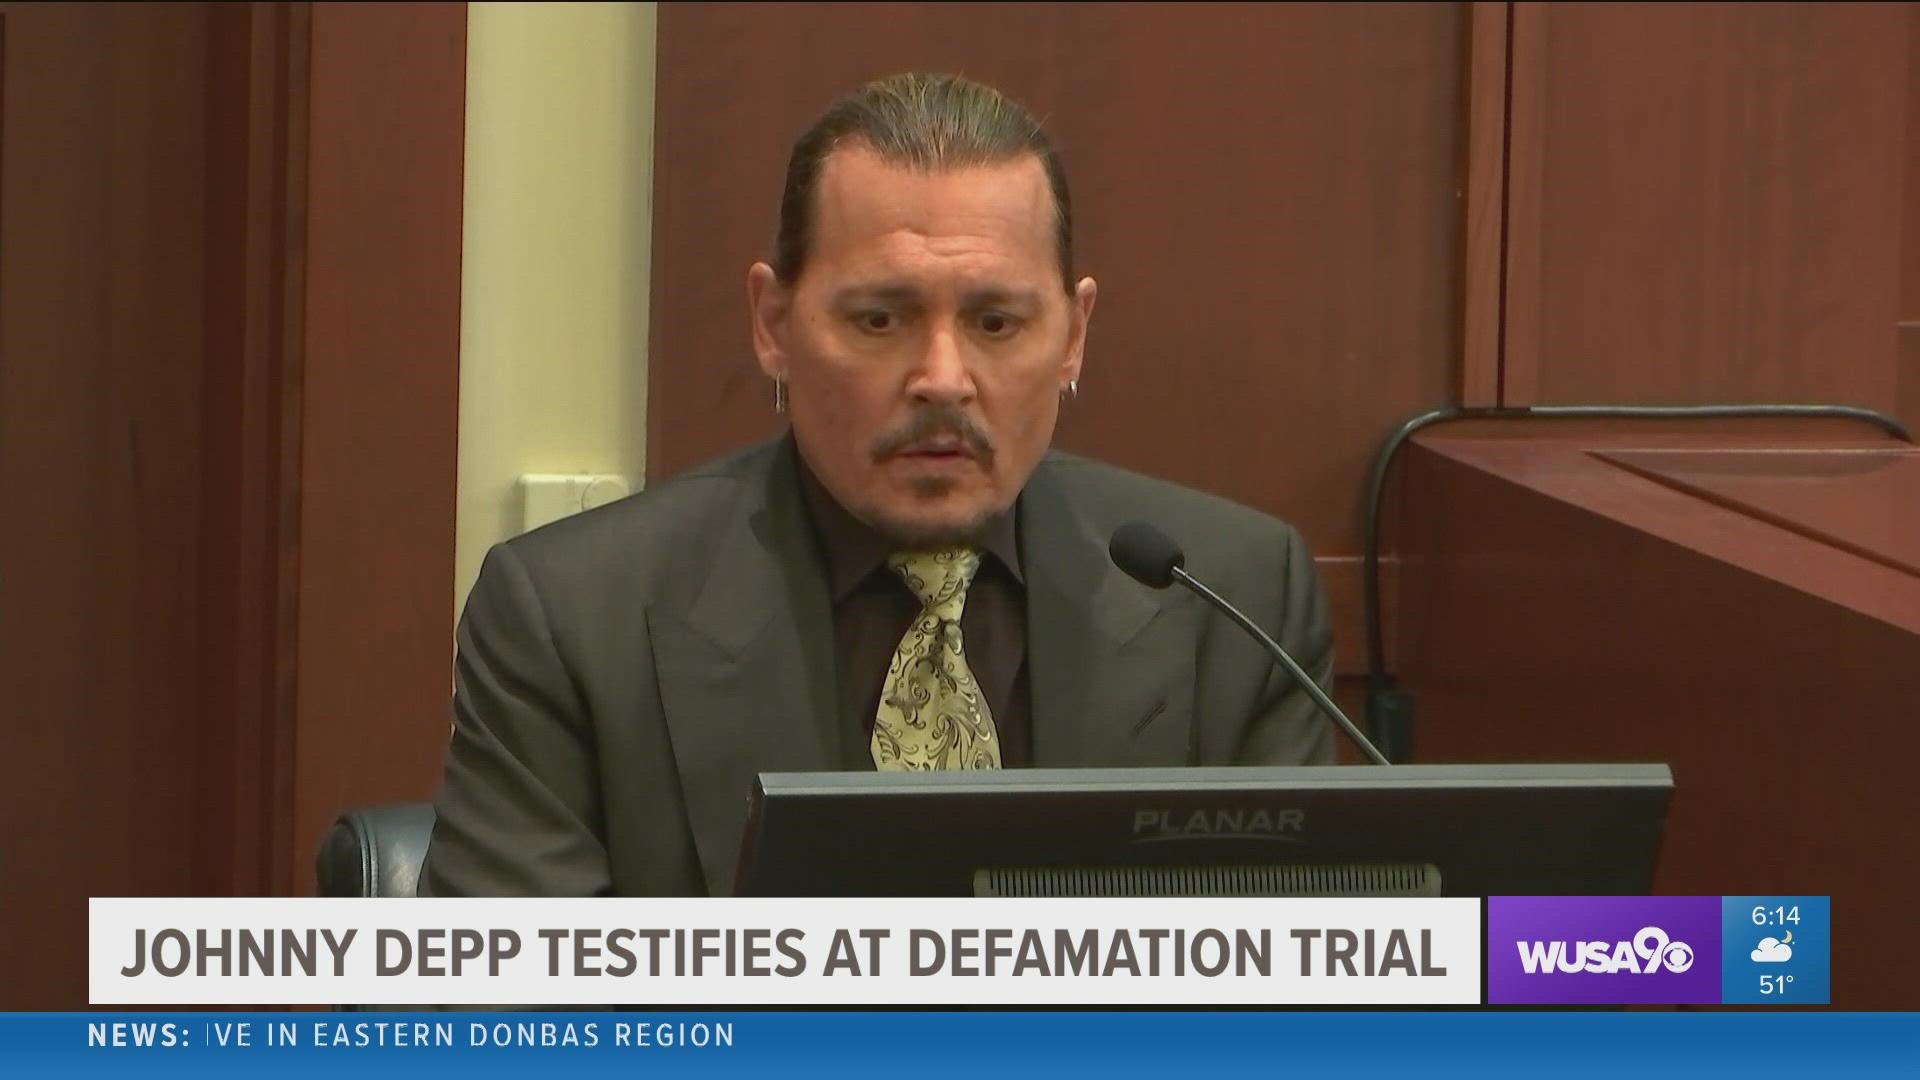 Depp on Tuesday flatly denied ever hitting Heard, calling the allegations against him disturbing, heinous and “not based in any species of truth.”